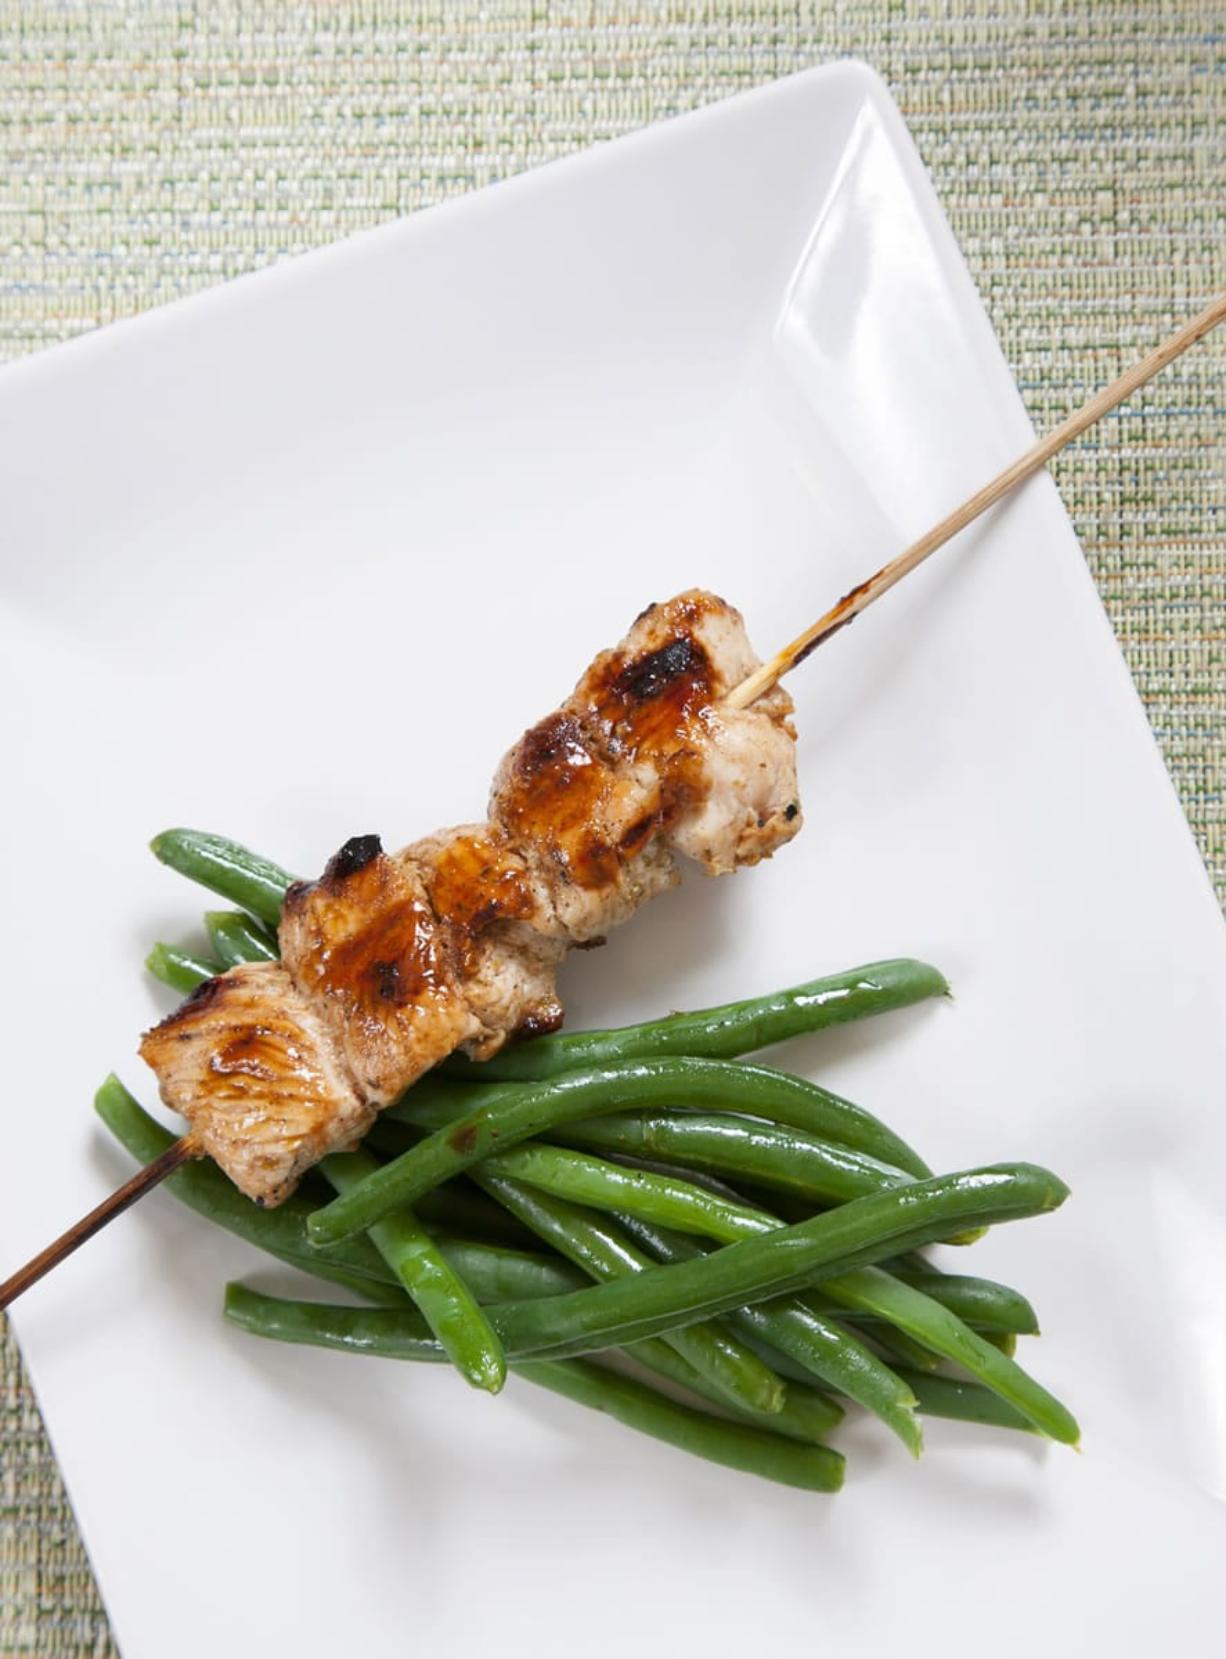 No shortage of good reasons for giving these kebabs a try - Columbian.com